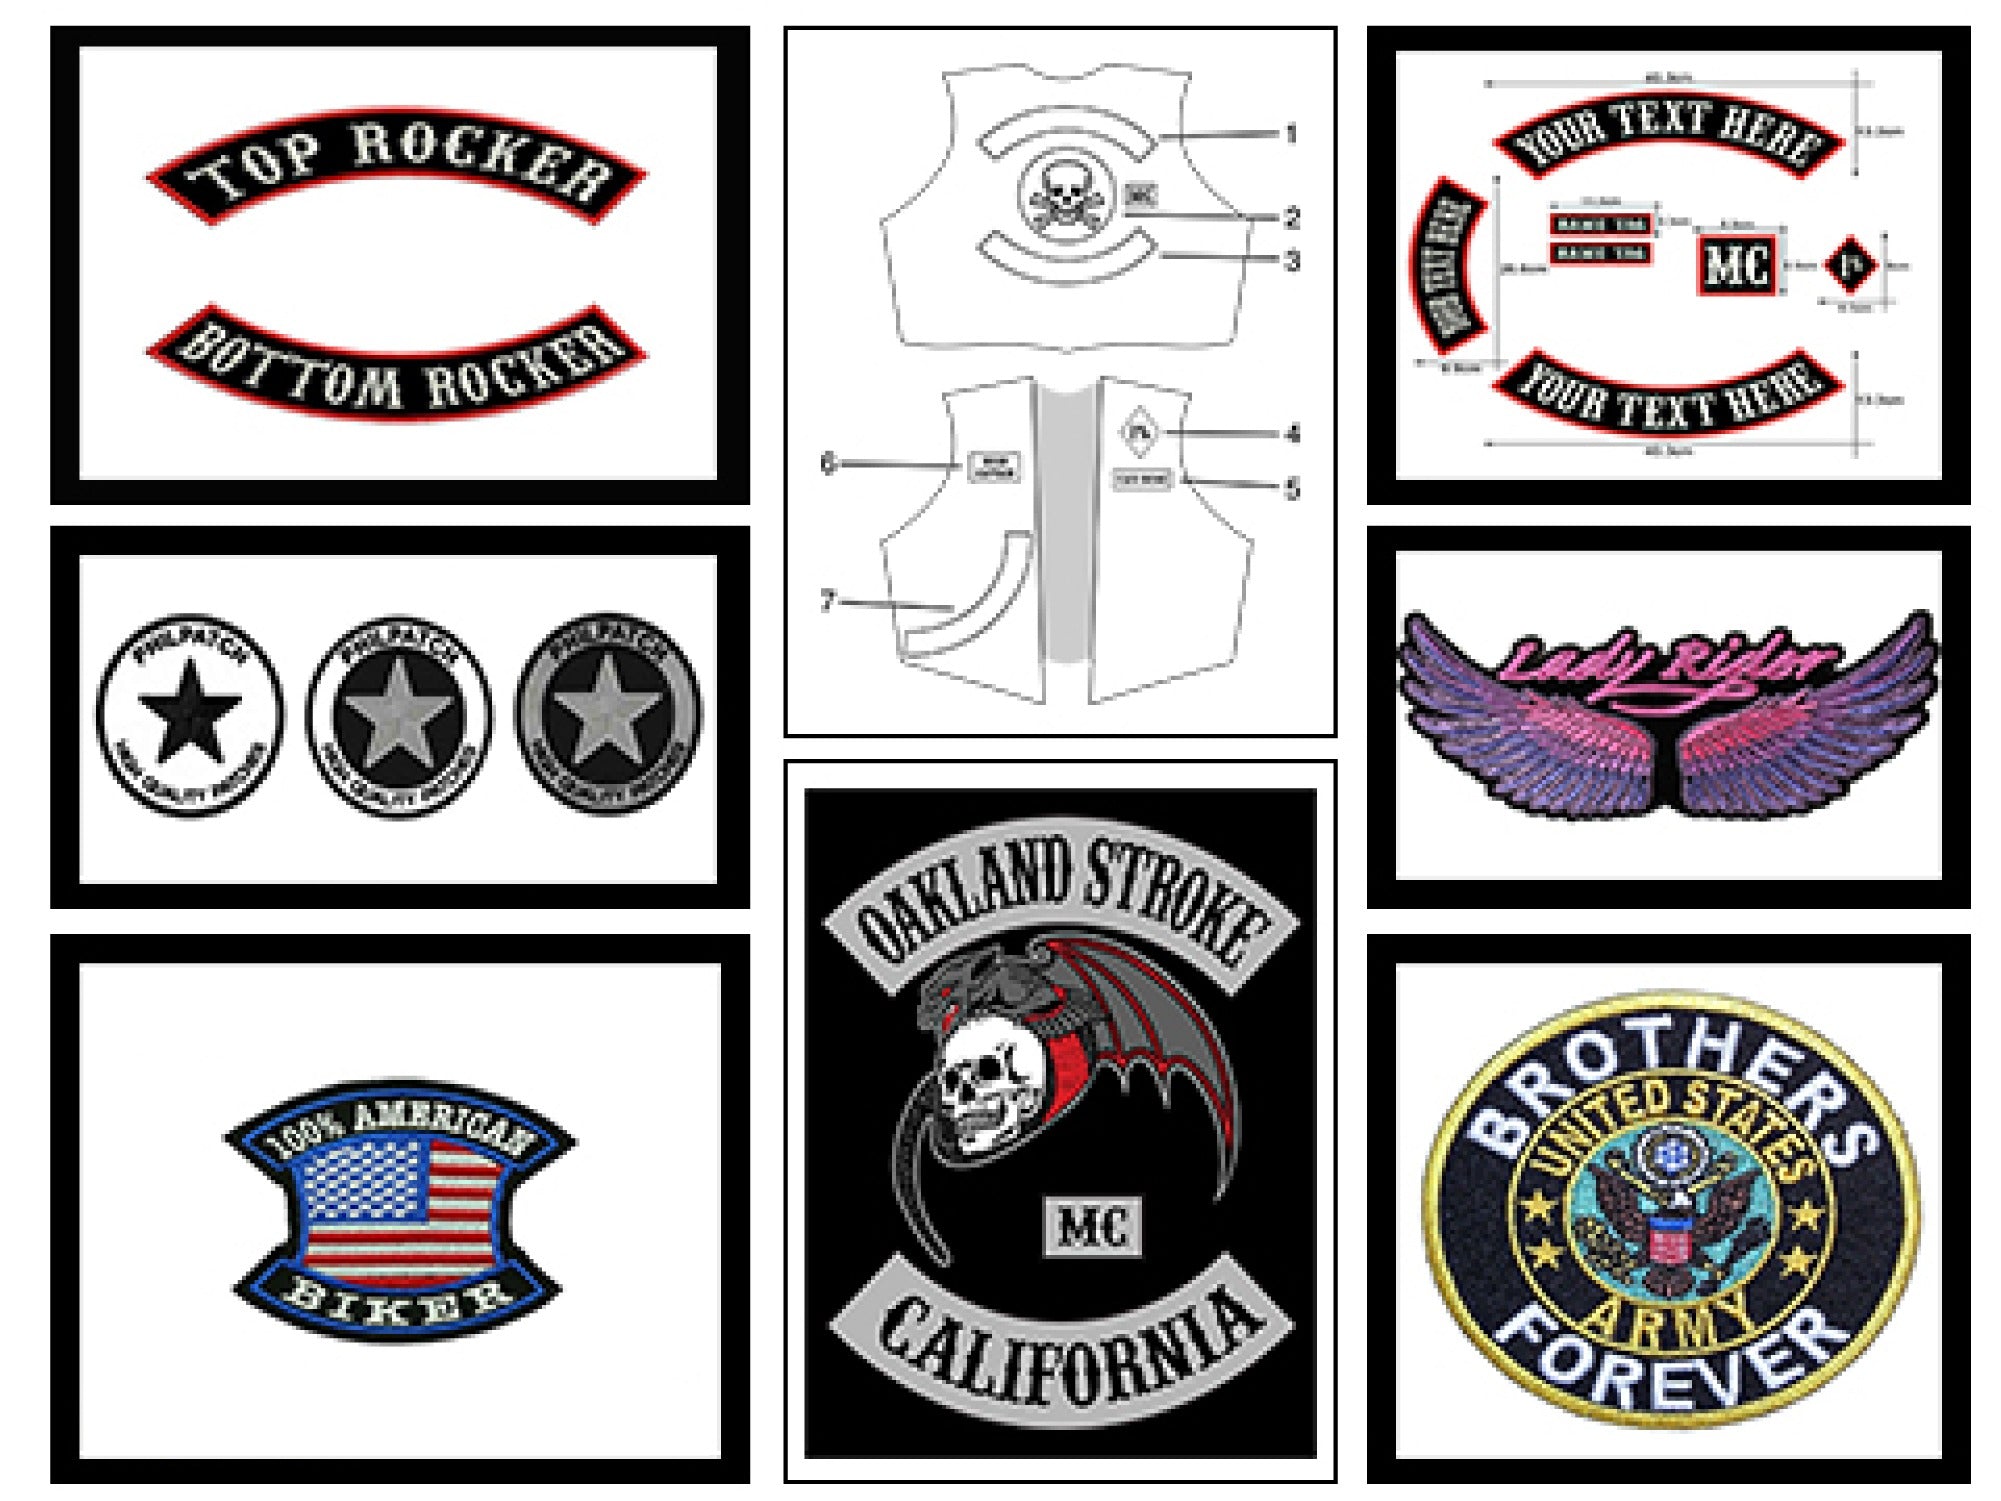 The Ultimate Guide to Wearing Biker Patches